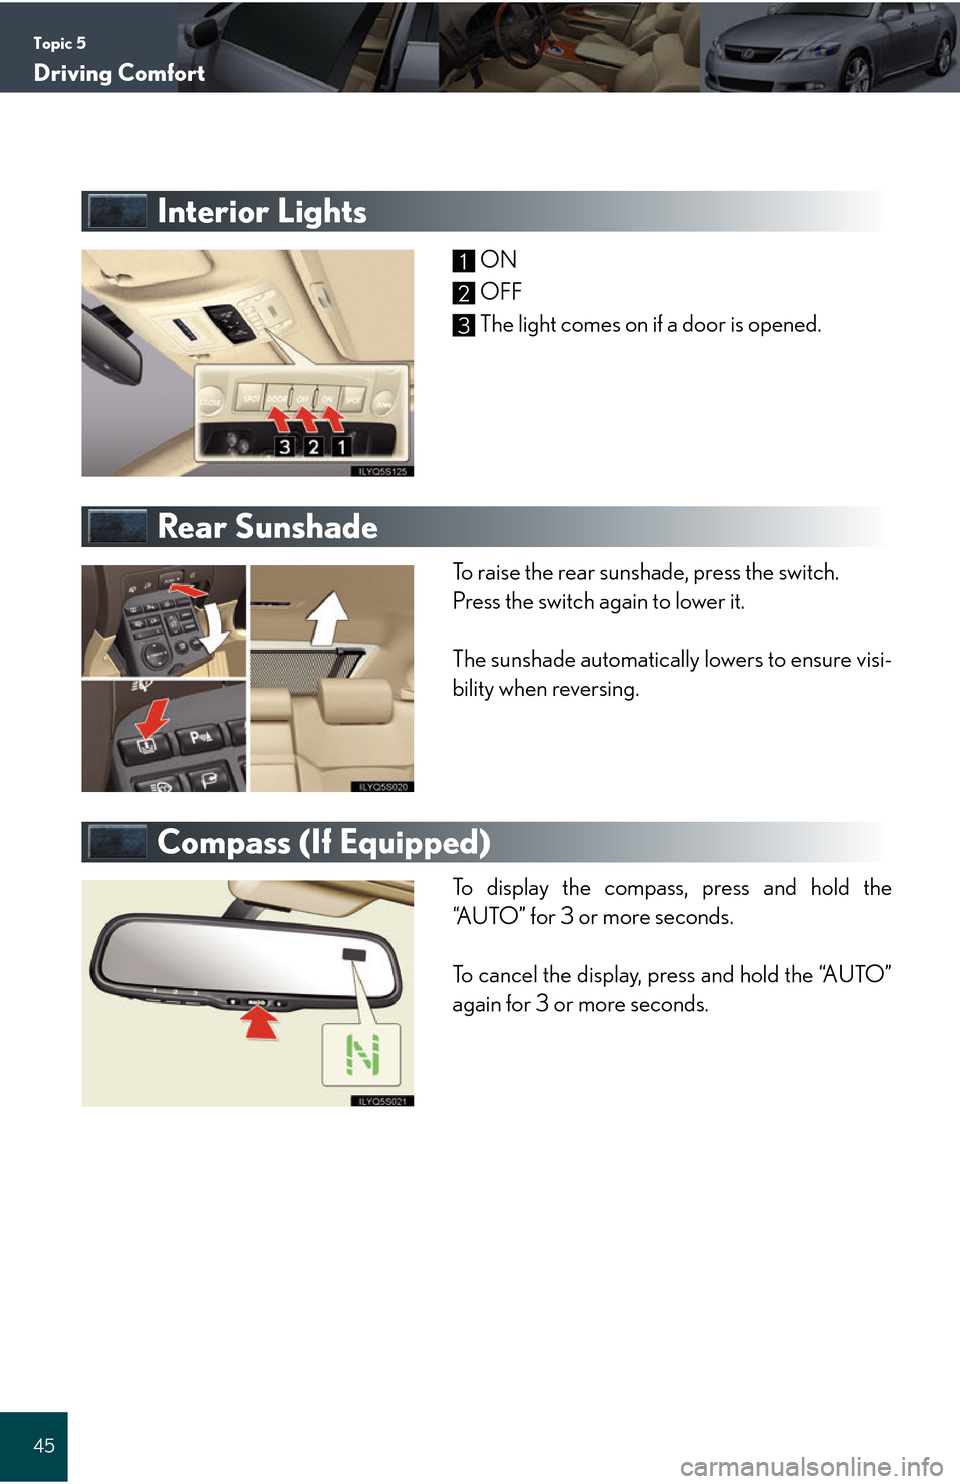 Lexus GS450h 2008  Using the audio system / LEXUS 2008 GS450H QUICK GUIDE OWNERS MANUAL (OM30B13U) Topic 5
Driving Comfort
45
Interior Lights
ON
OFF
The light comes on if a door is opened.
Rear Sunshade 
To raise the rear sunshade, press the switch.
Press the switch again to lower it.
The sunshade 